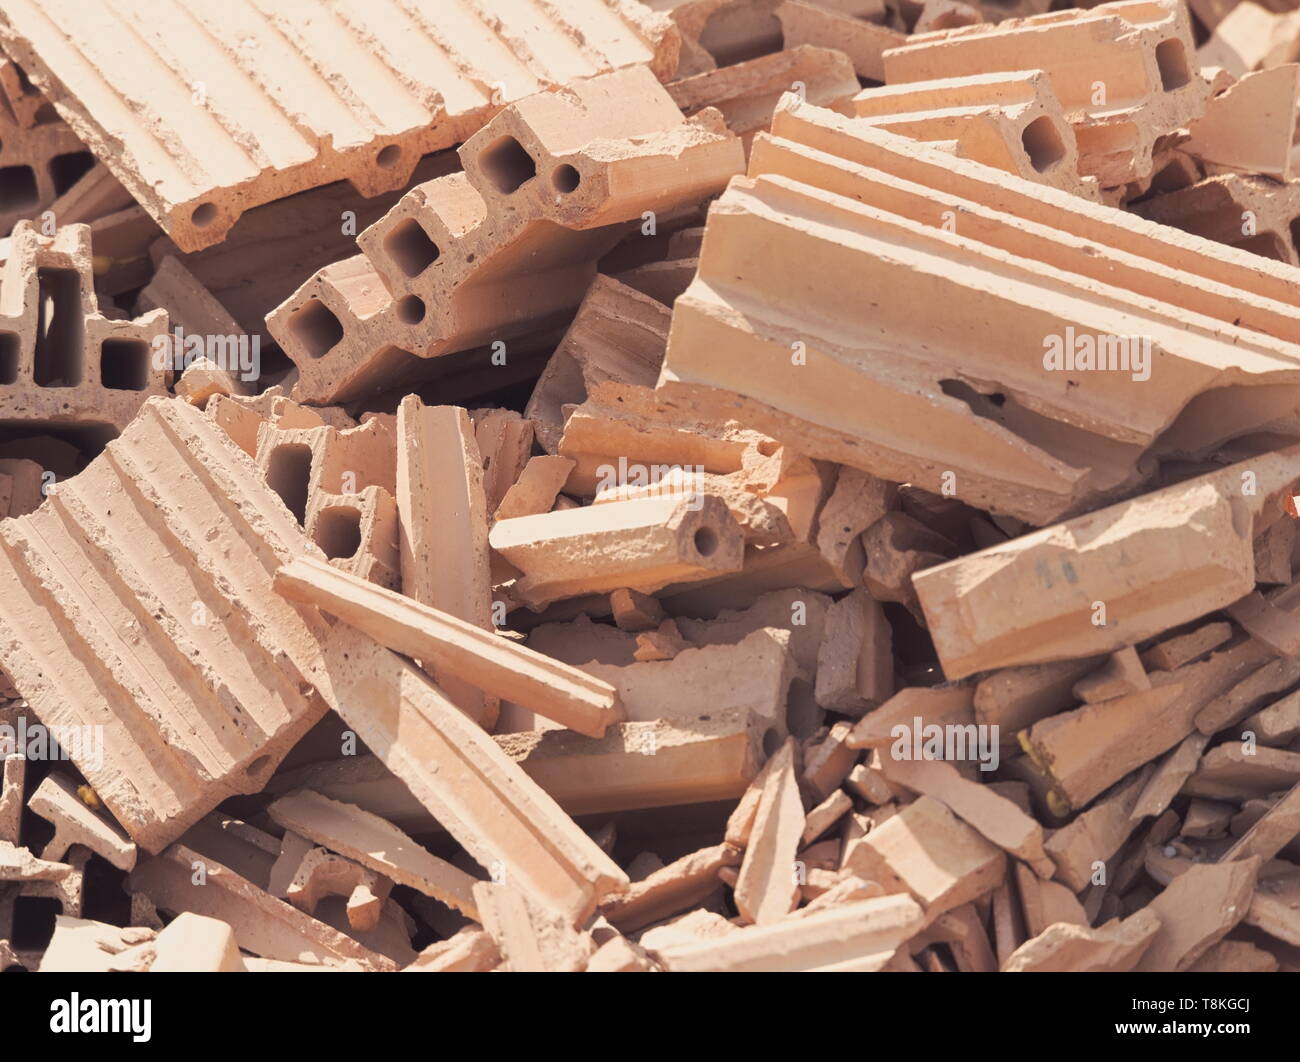 Red Brick Debris Pile on a Sunny Day Closeup Stock Photo